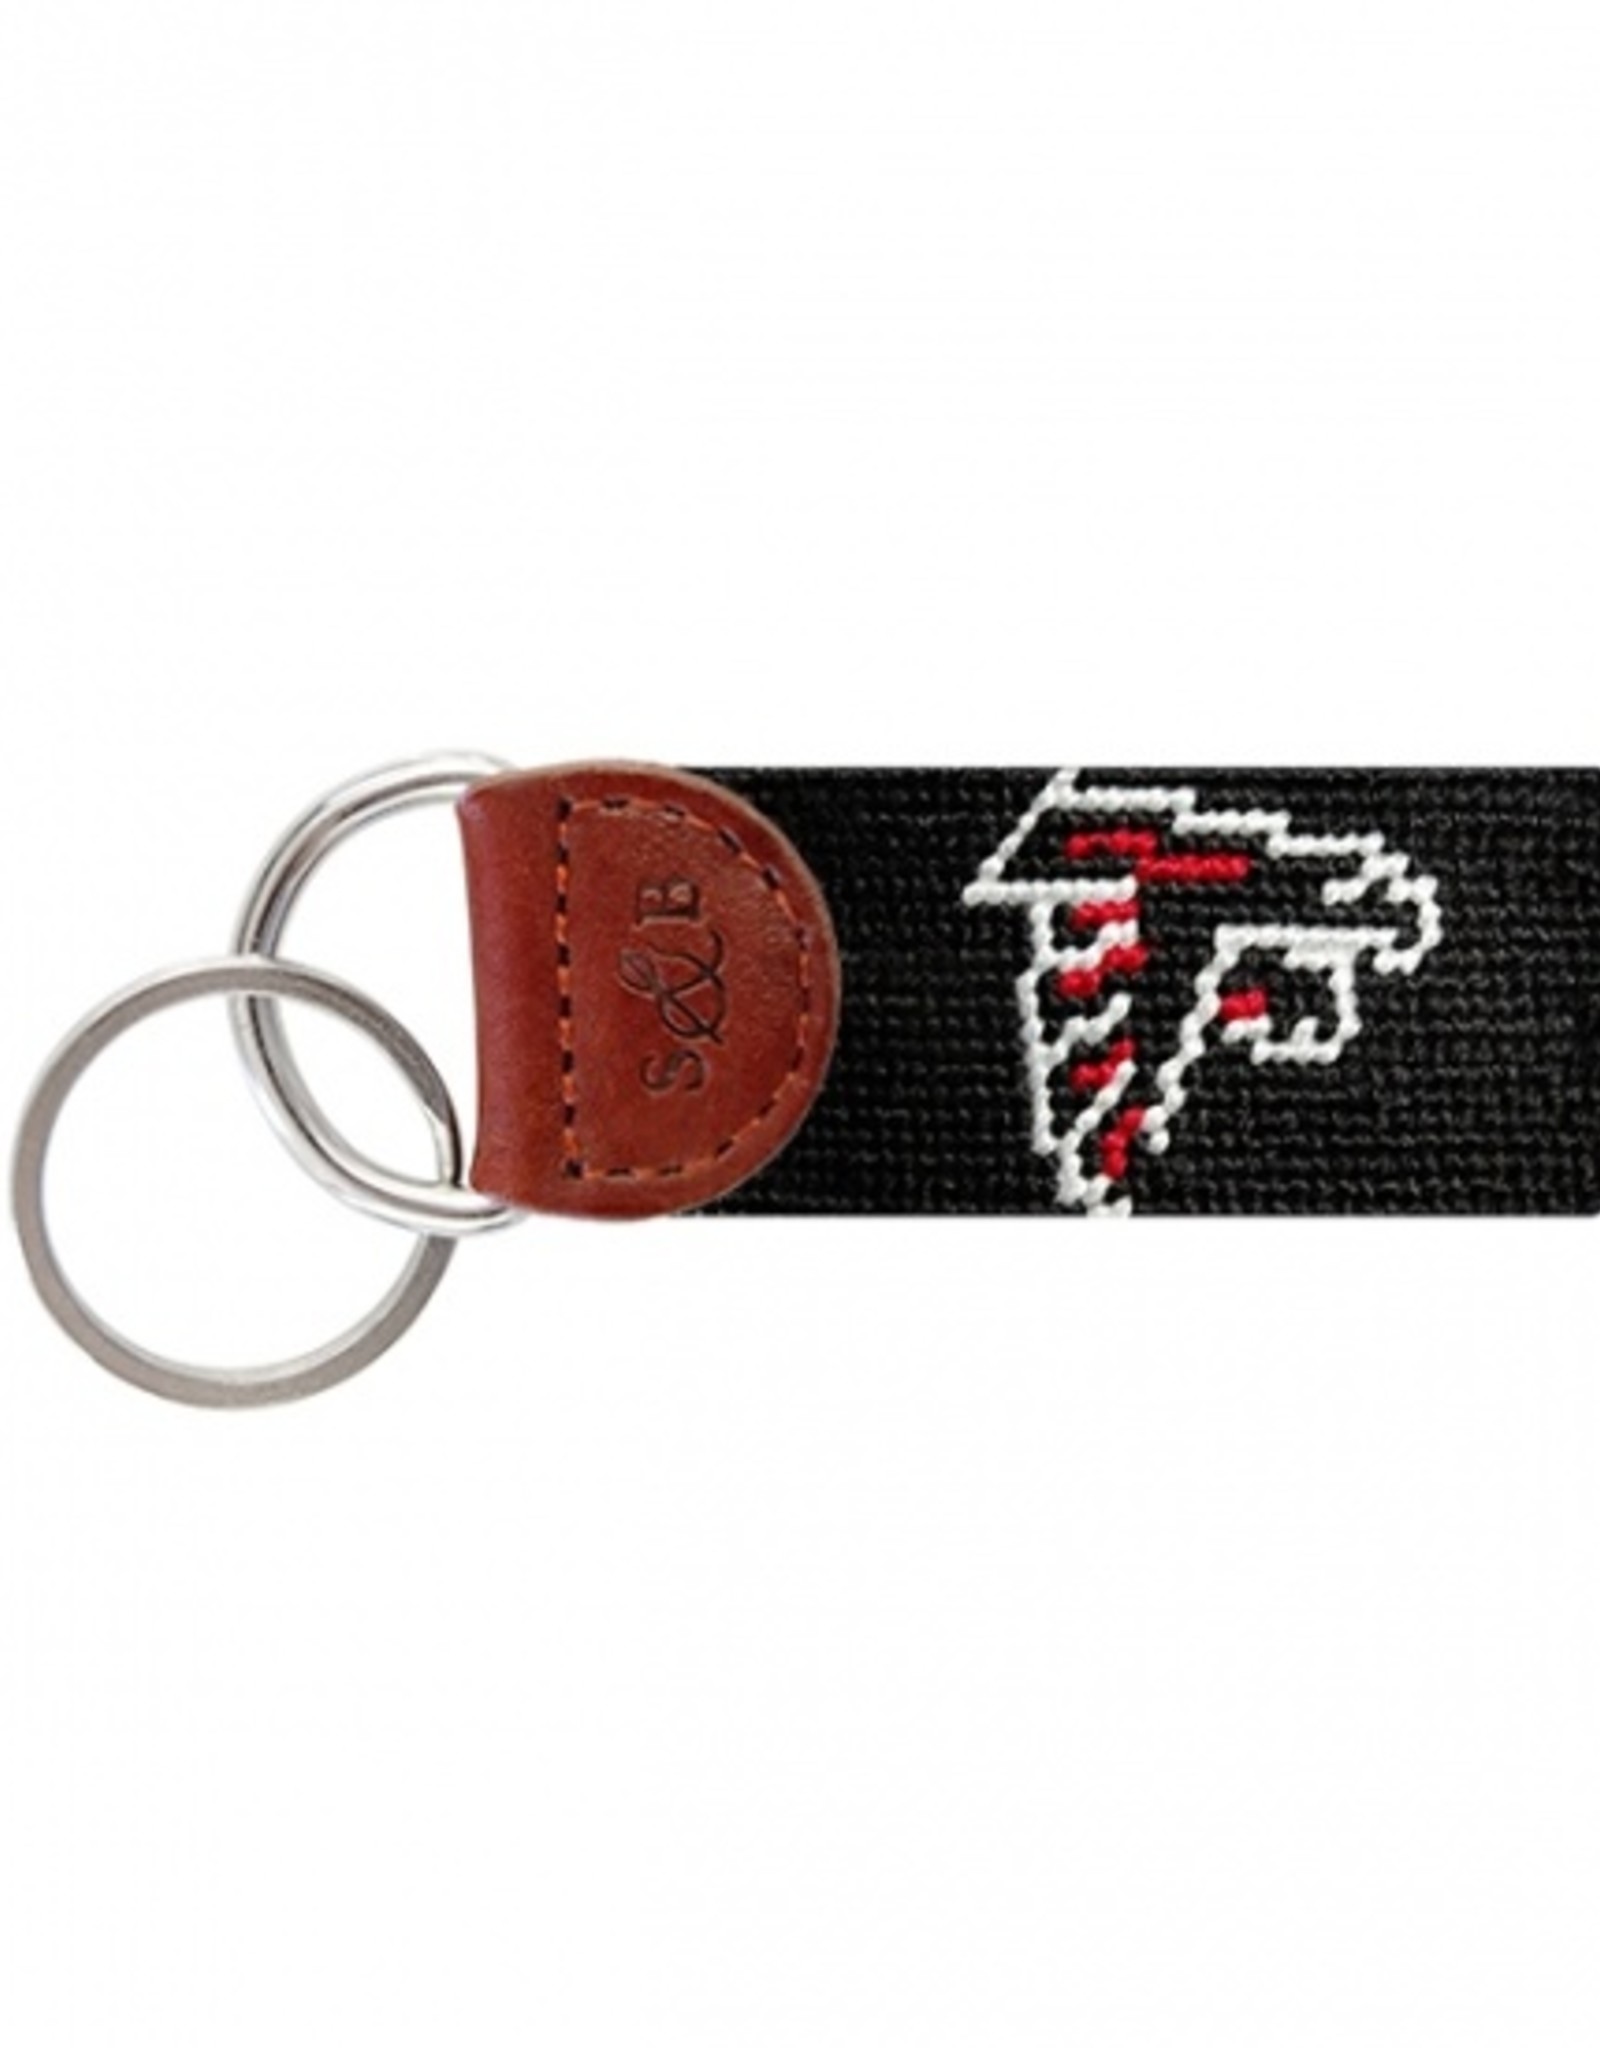 Smathers and Branson Falcons Key Fob